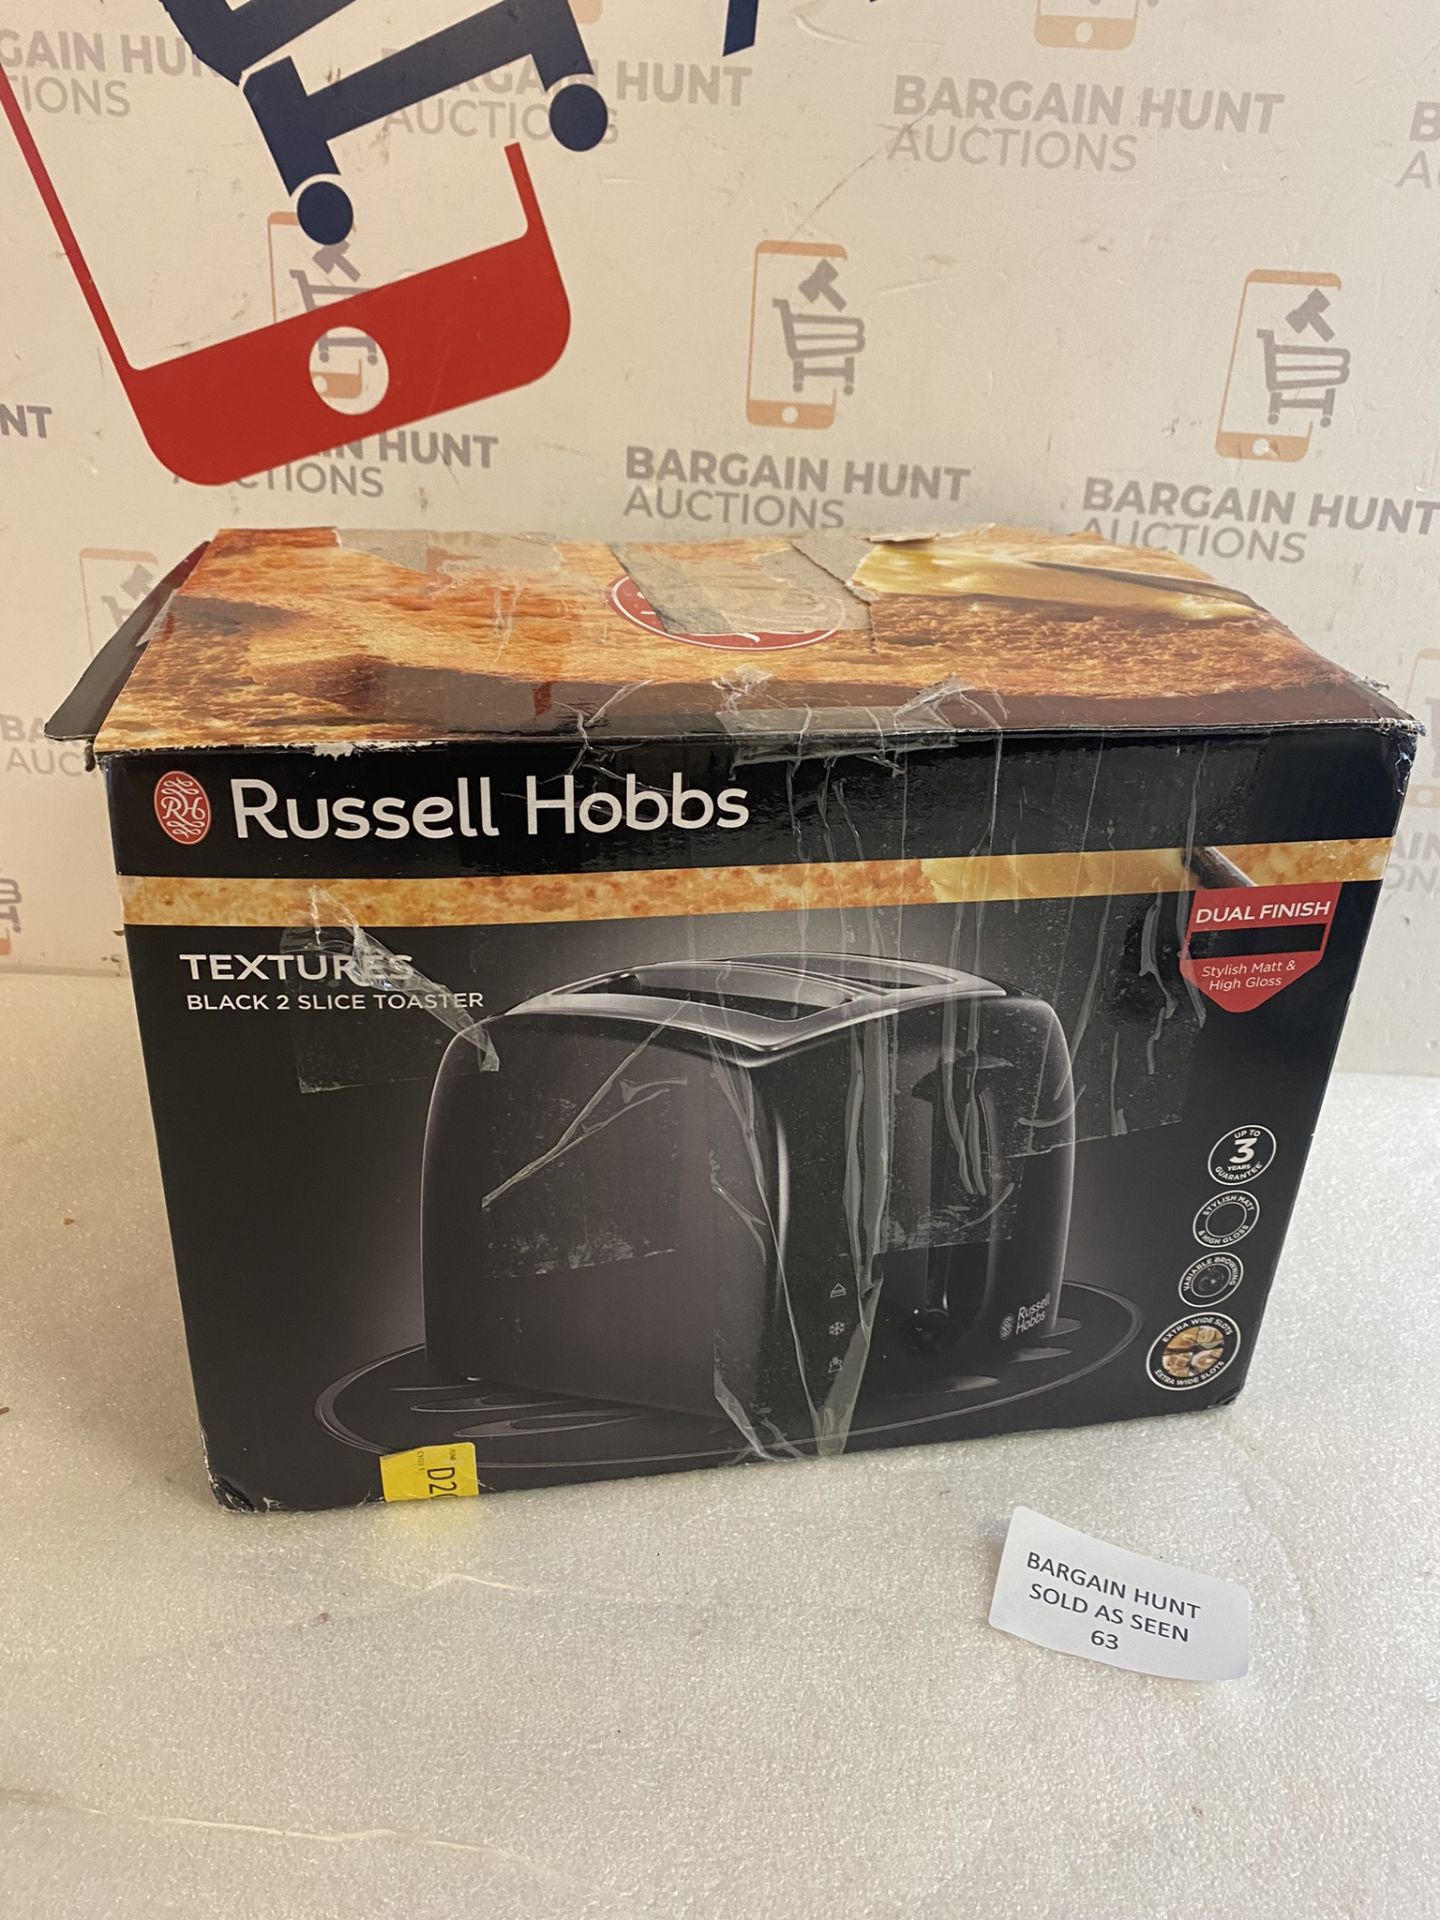 Russell Hobbs 21641 Textures 2-Slice Toaster RRP £20.99